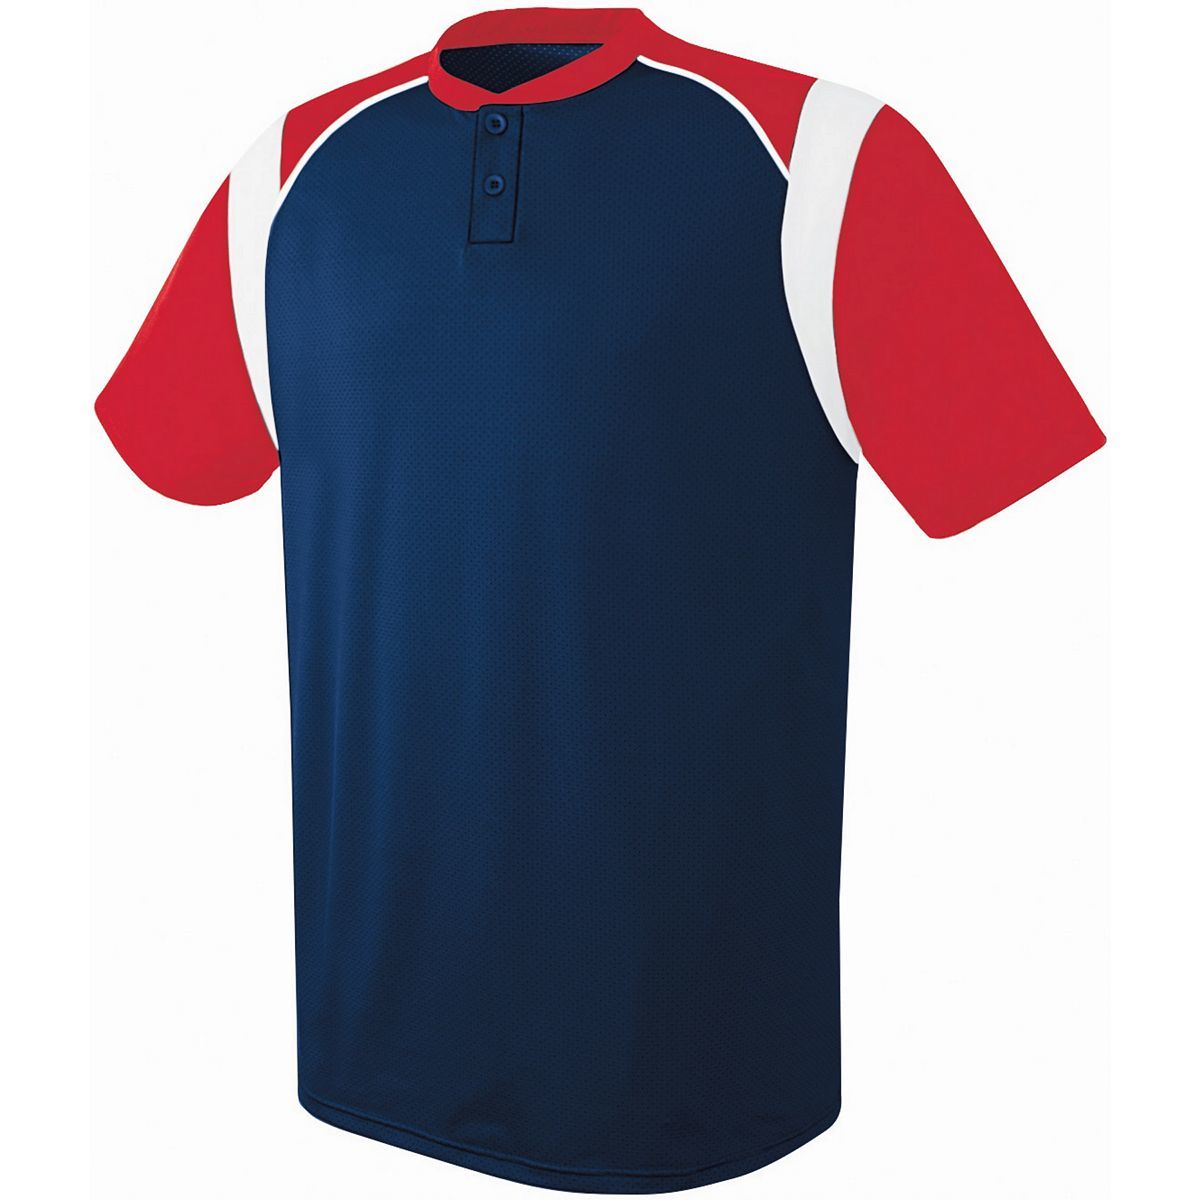 Augusta Sportswear Wildcard Two-Button Jersey in Navy/Scarlet/White  -Part of the Adult, Adult-Jersey, Augusta-Products, Baseball, Shirts, All-Sports, All-Sports-1 product lines at KanaleyCreations.com